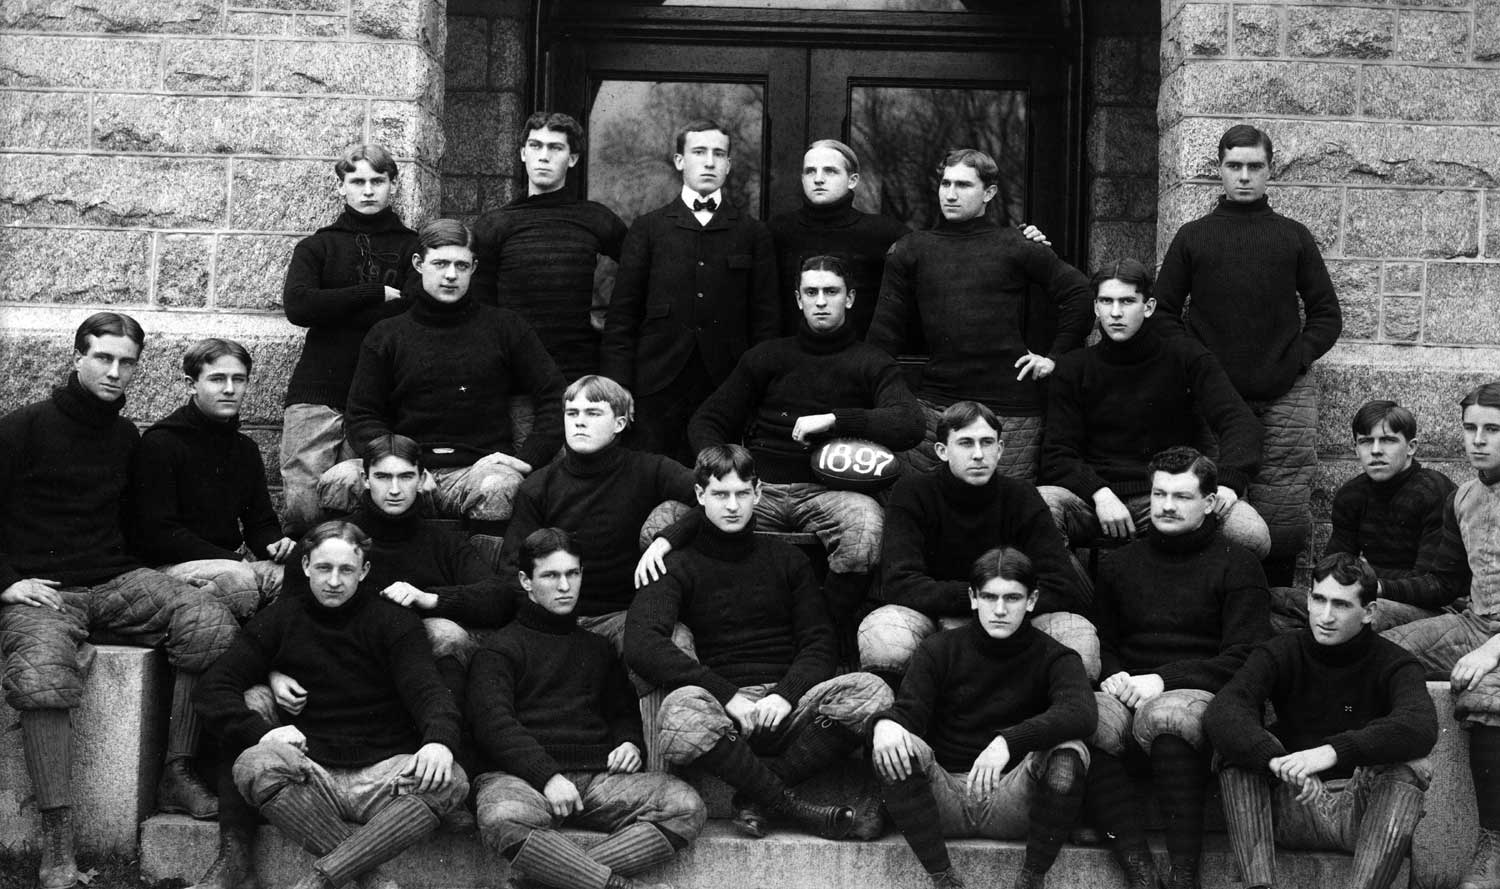 the football team poses together back in the late 1800s